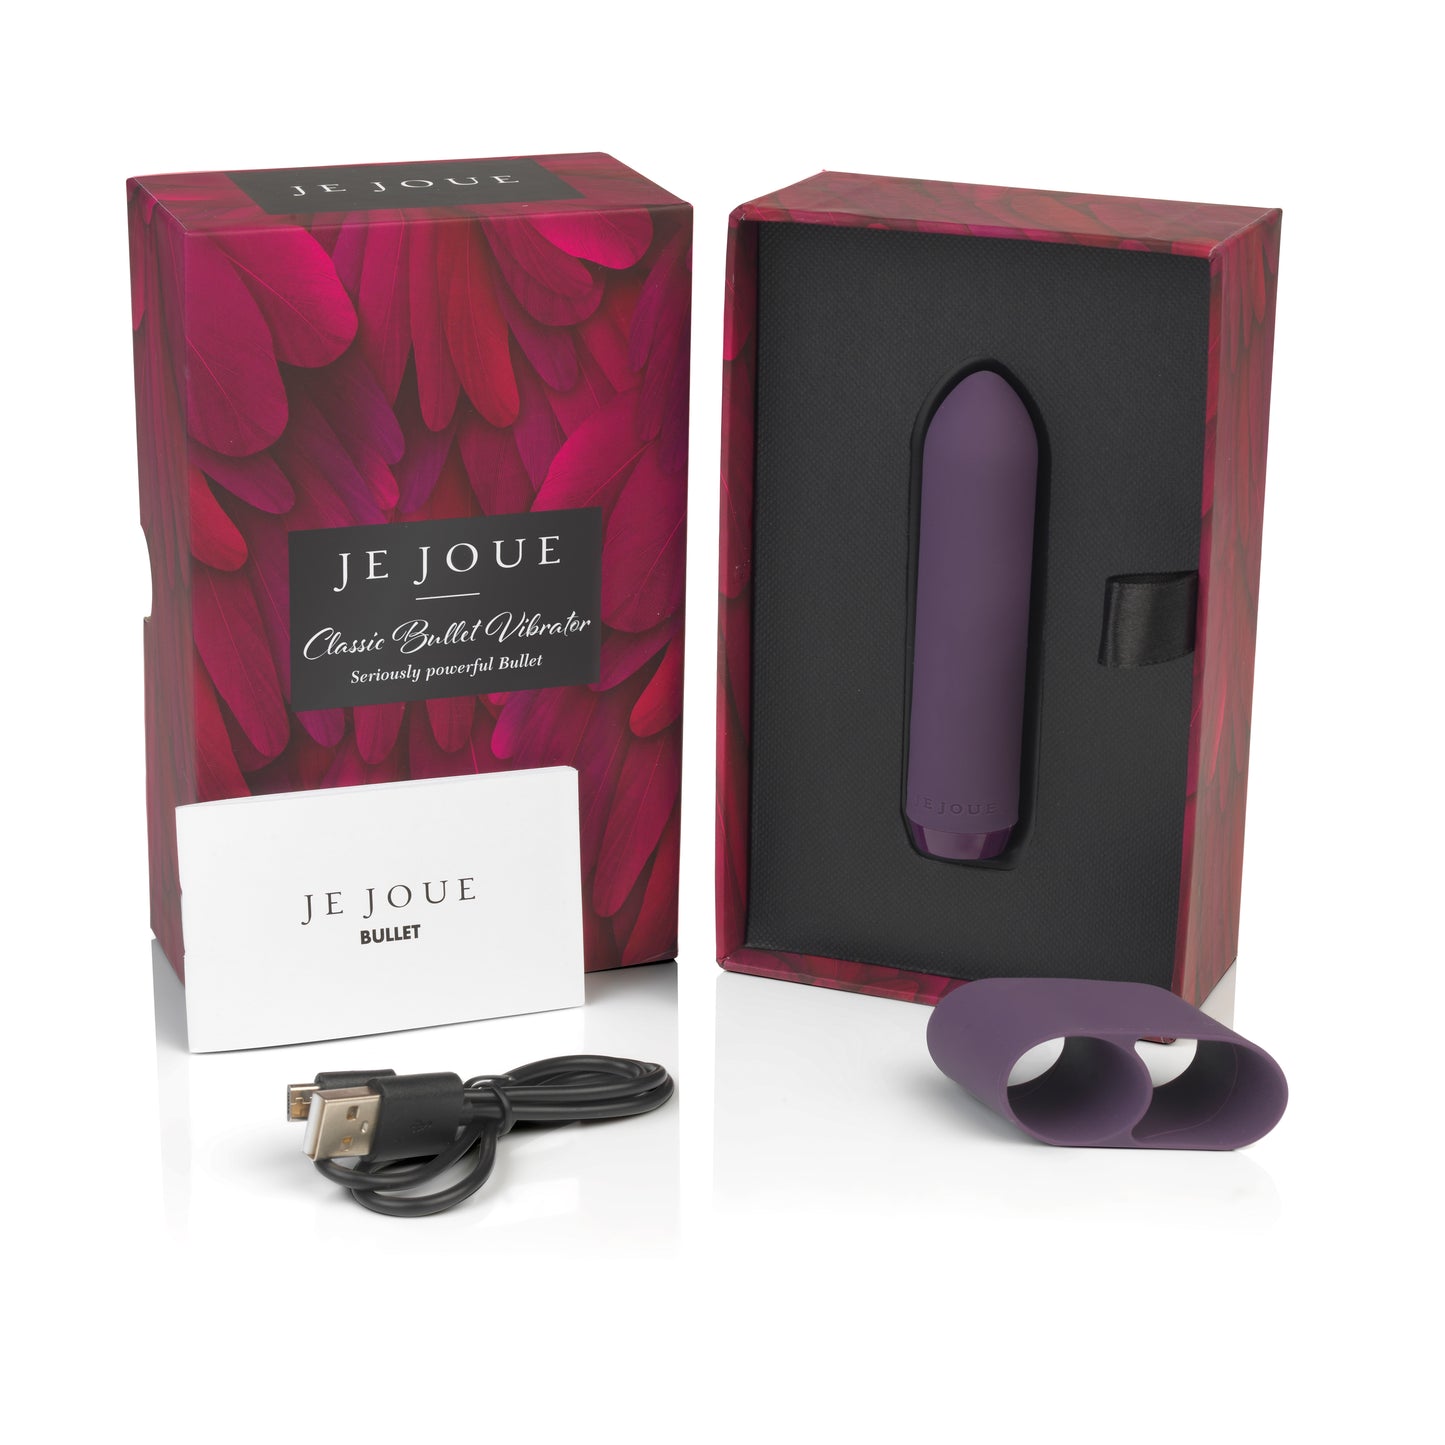 Classic Bullet Vibrator in box with accessories